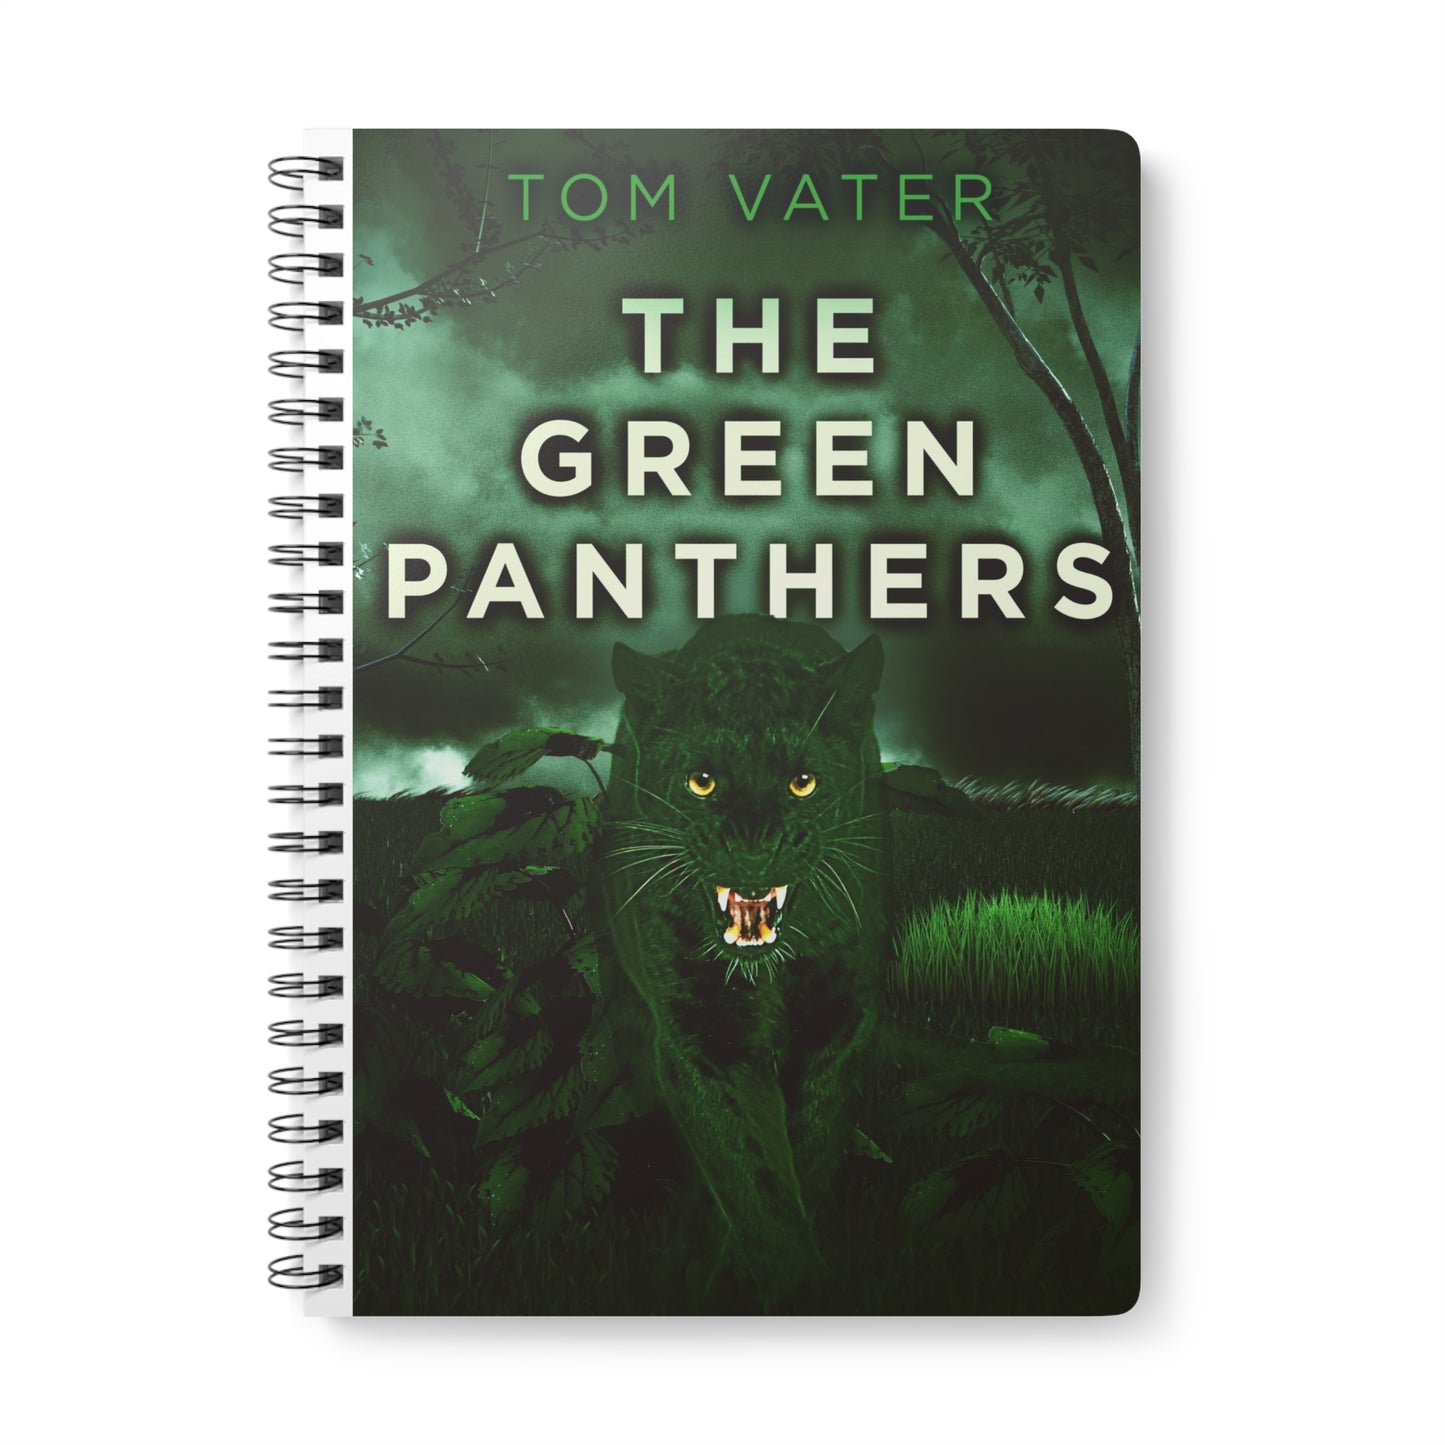 The Green Panthers - A5 Wirebound Notebook